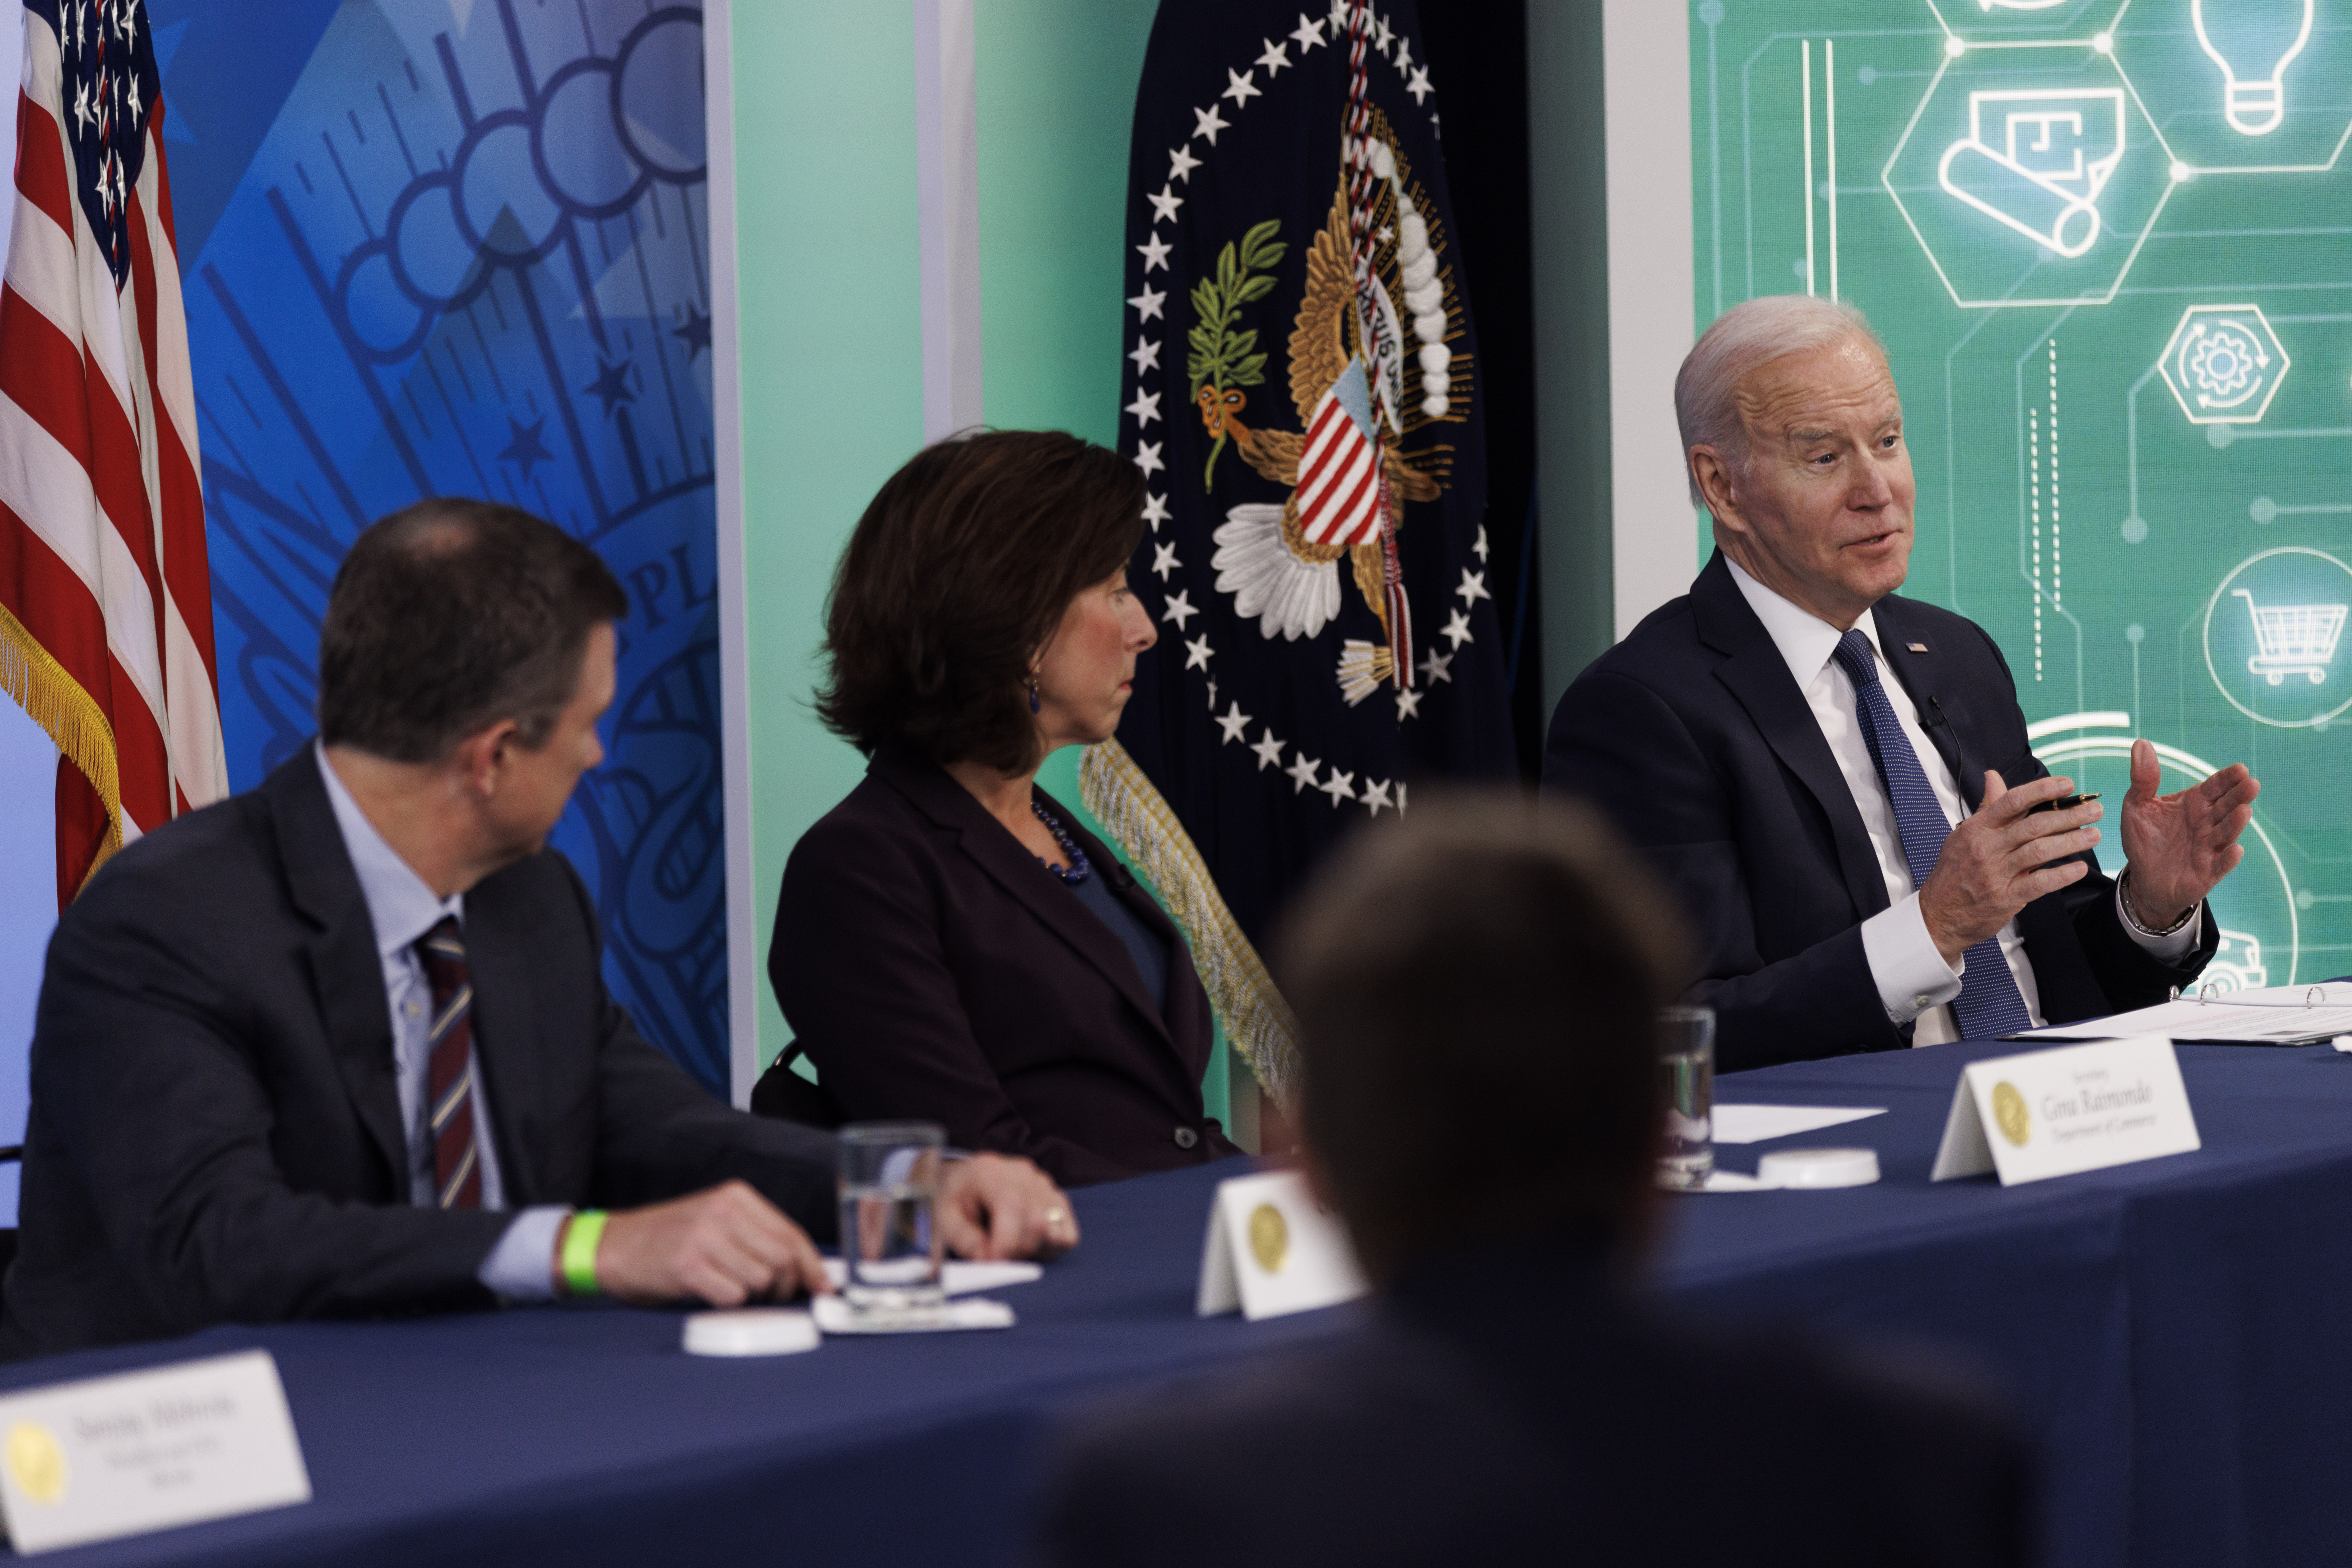 GettyImages-1239056849 Pushing to Get Every American High-Speed Internet, Biden Admin Plans $45B Boost